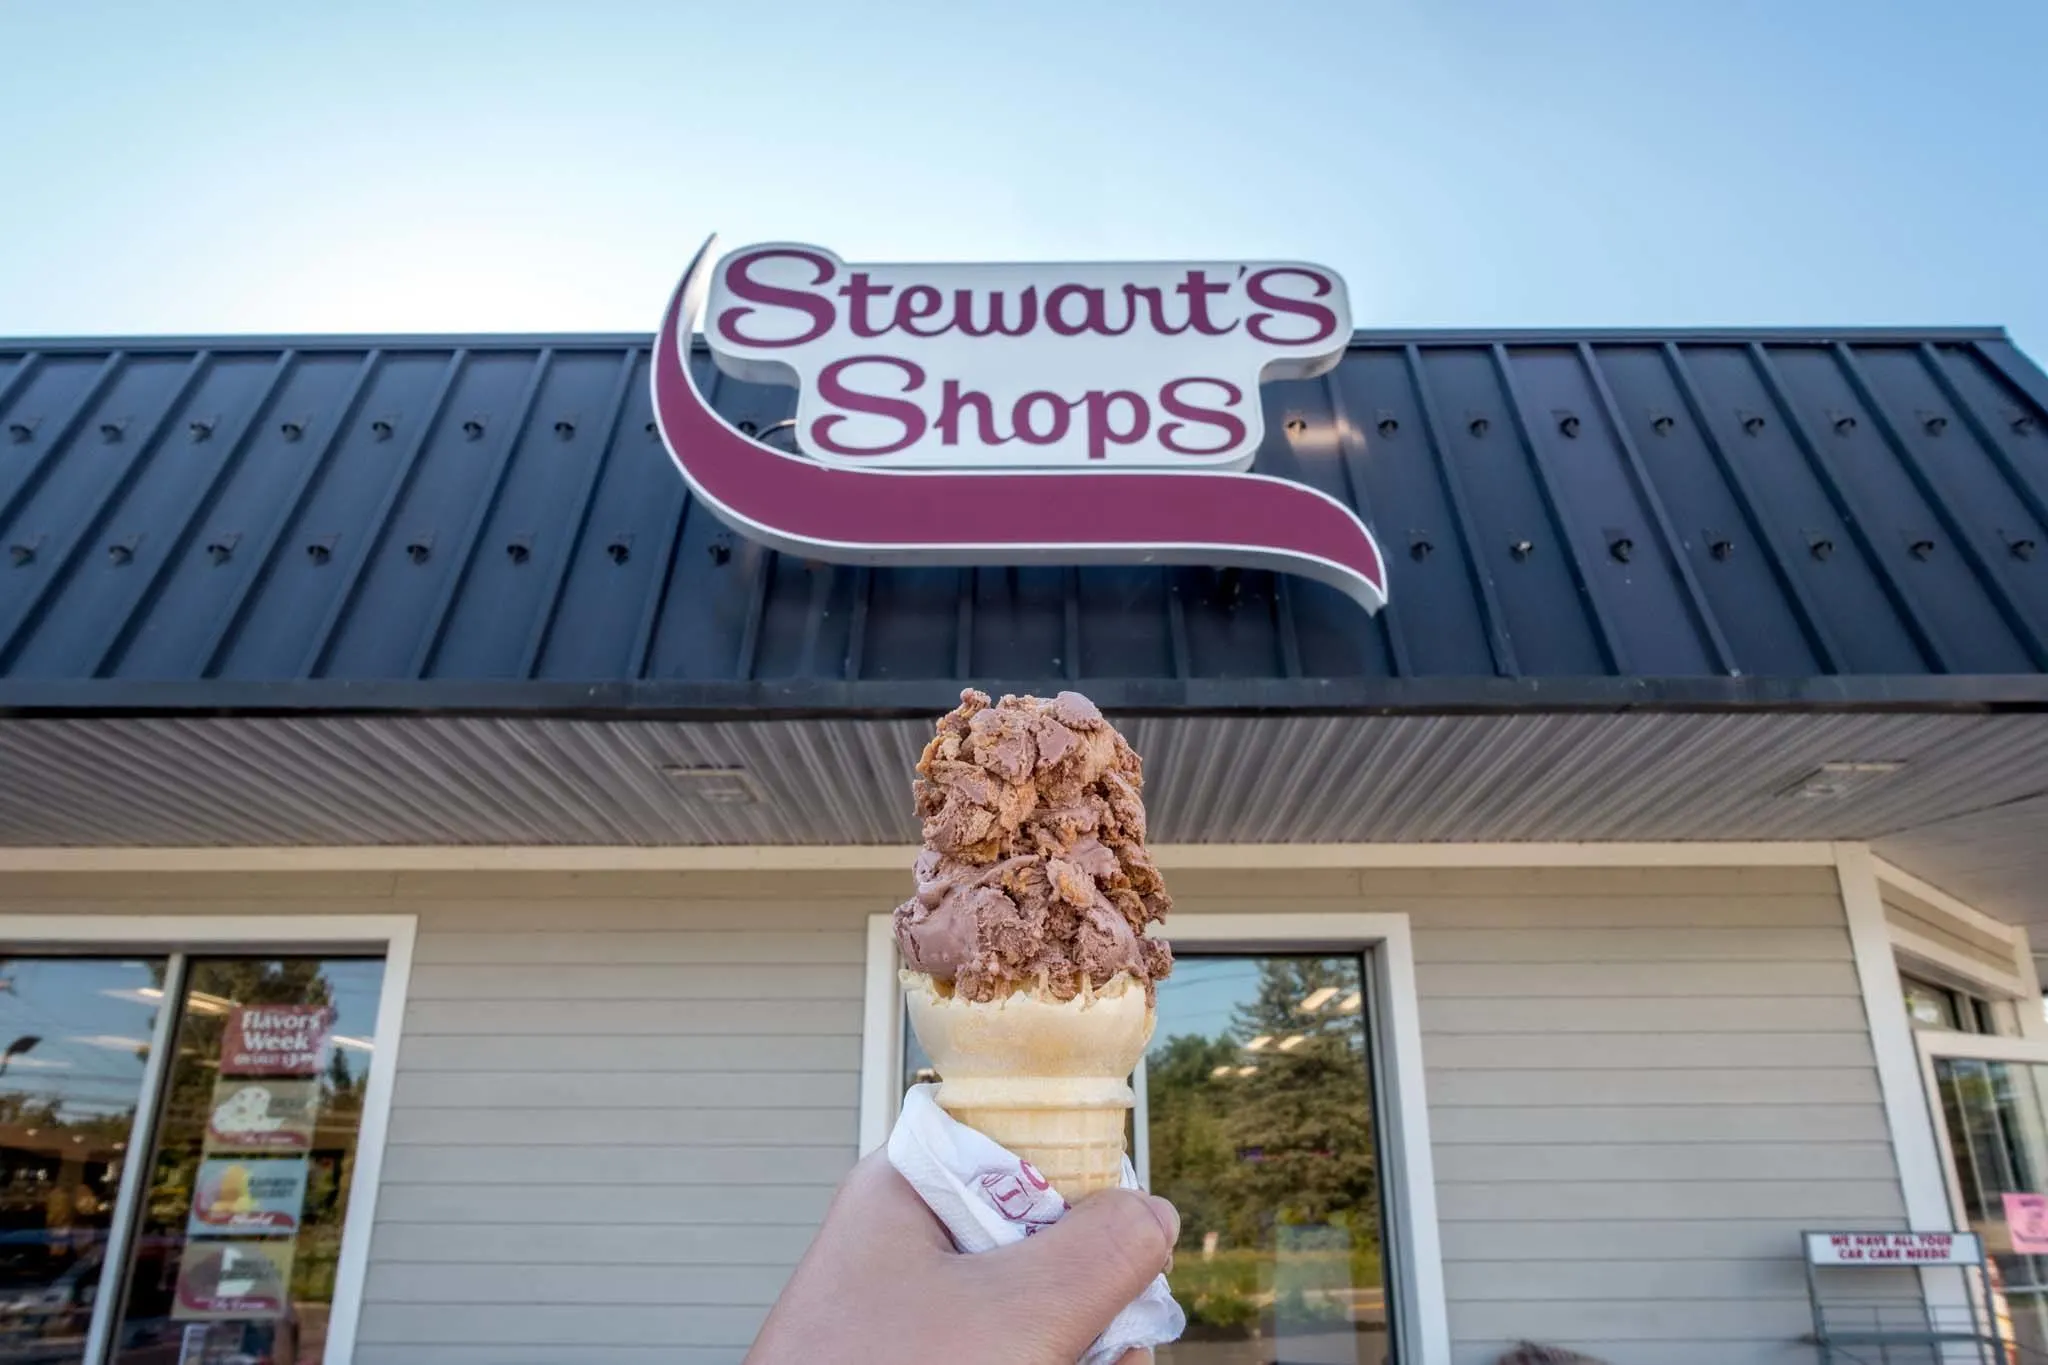 Ice cream cone in front of "Stewart's Shops" sign.